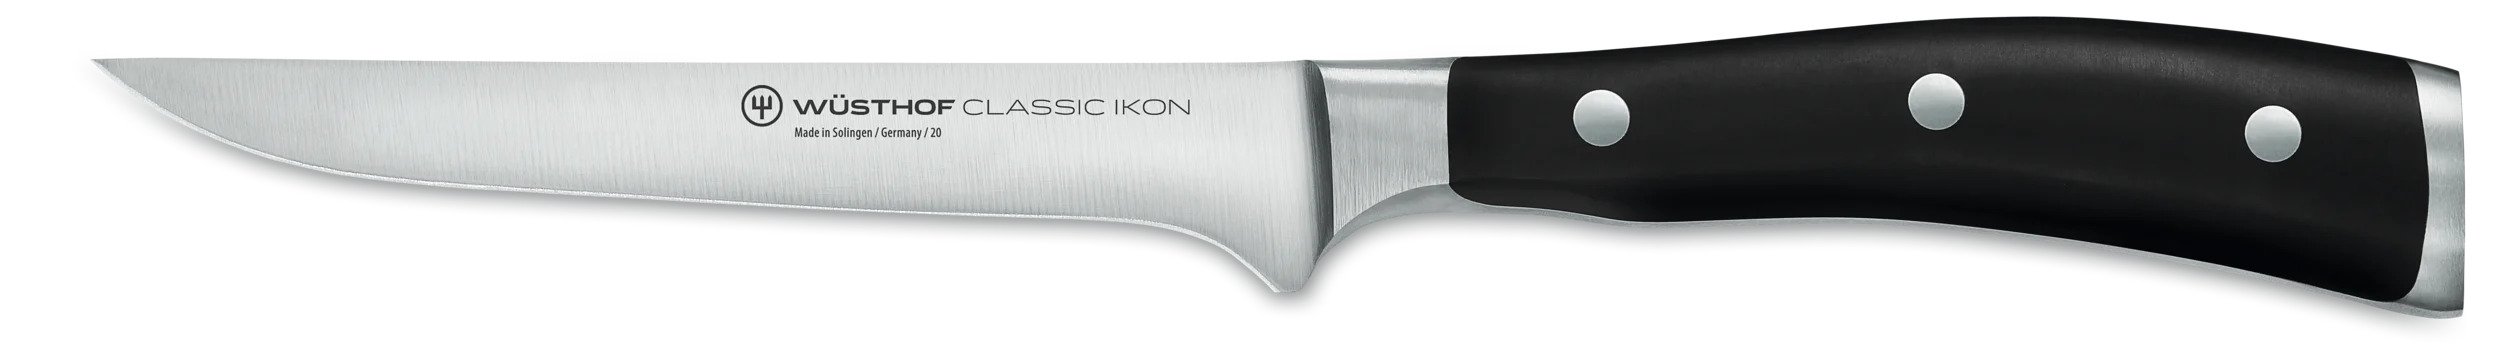 picture of a Wusthof German brand boning knife